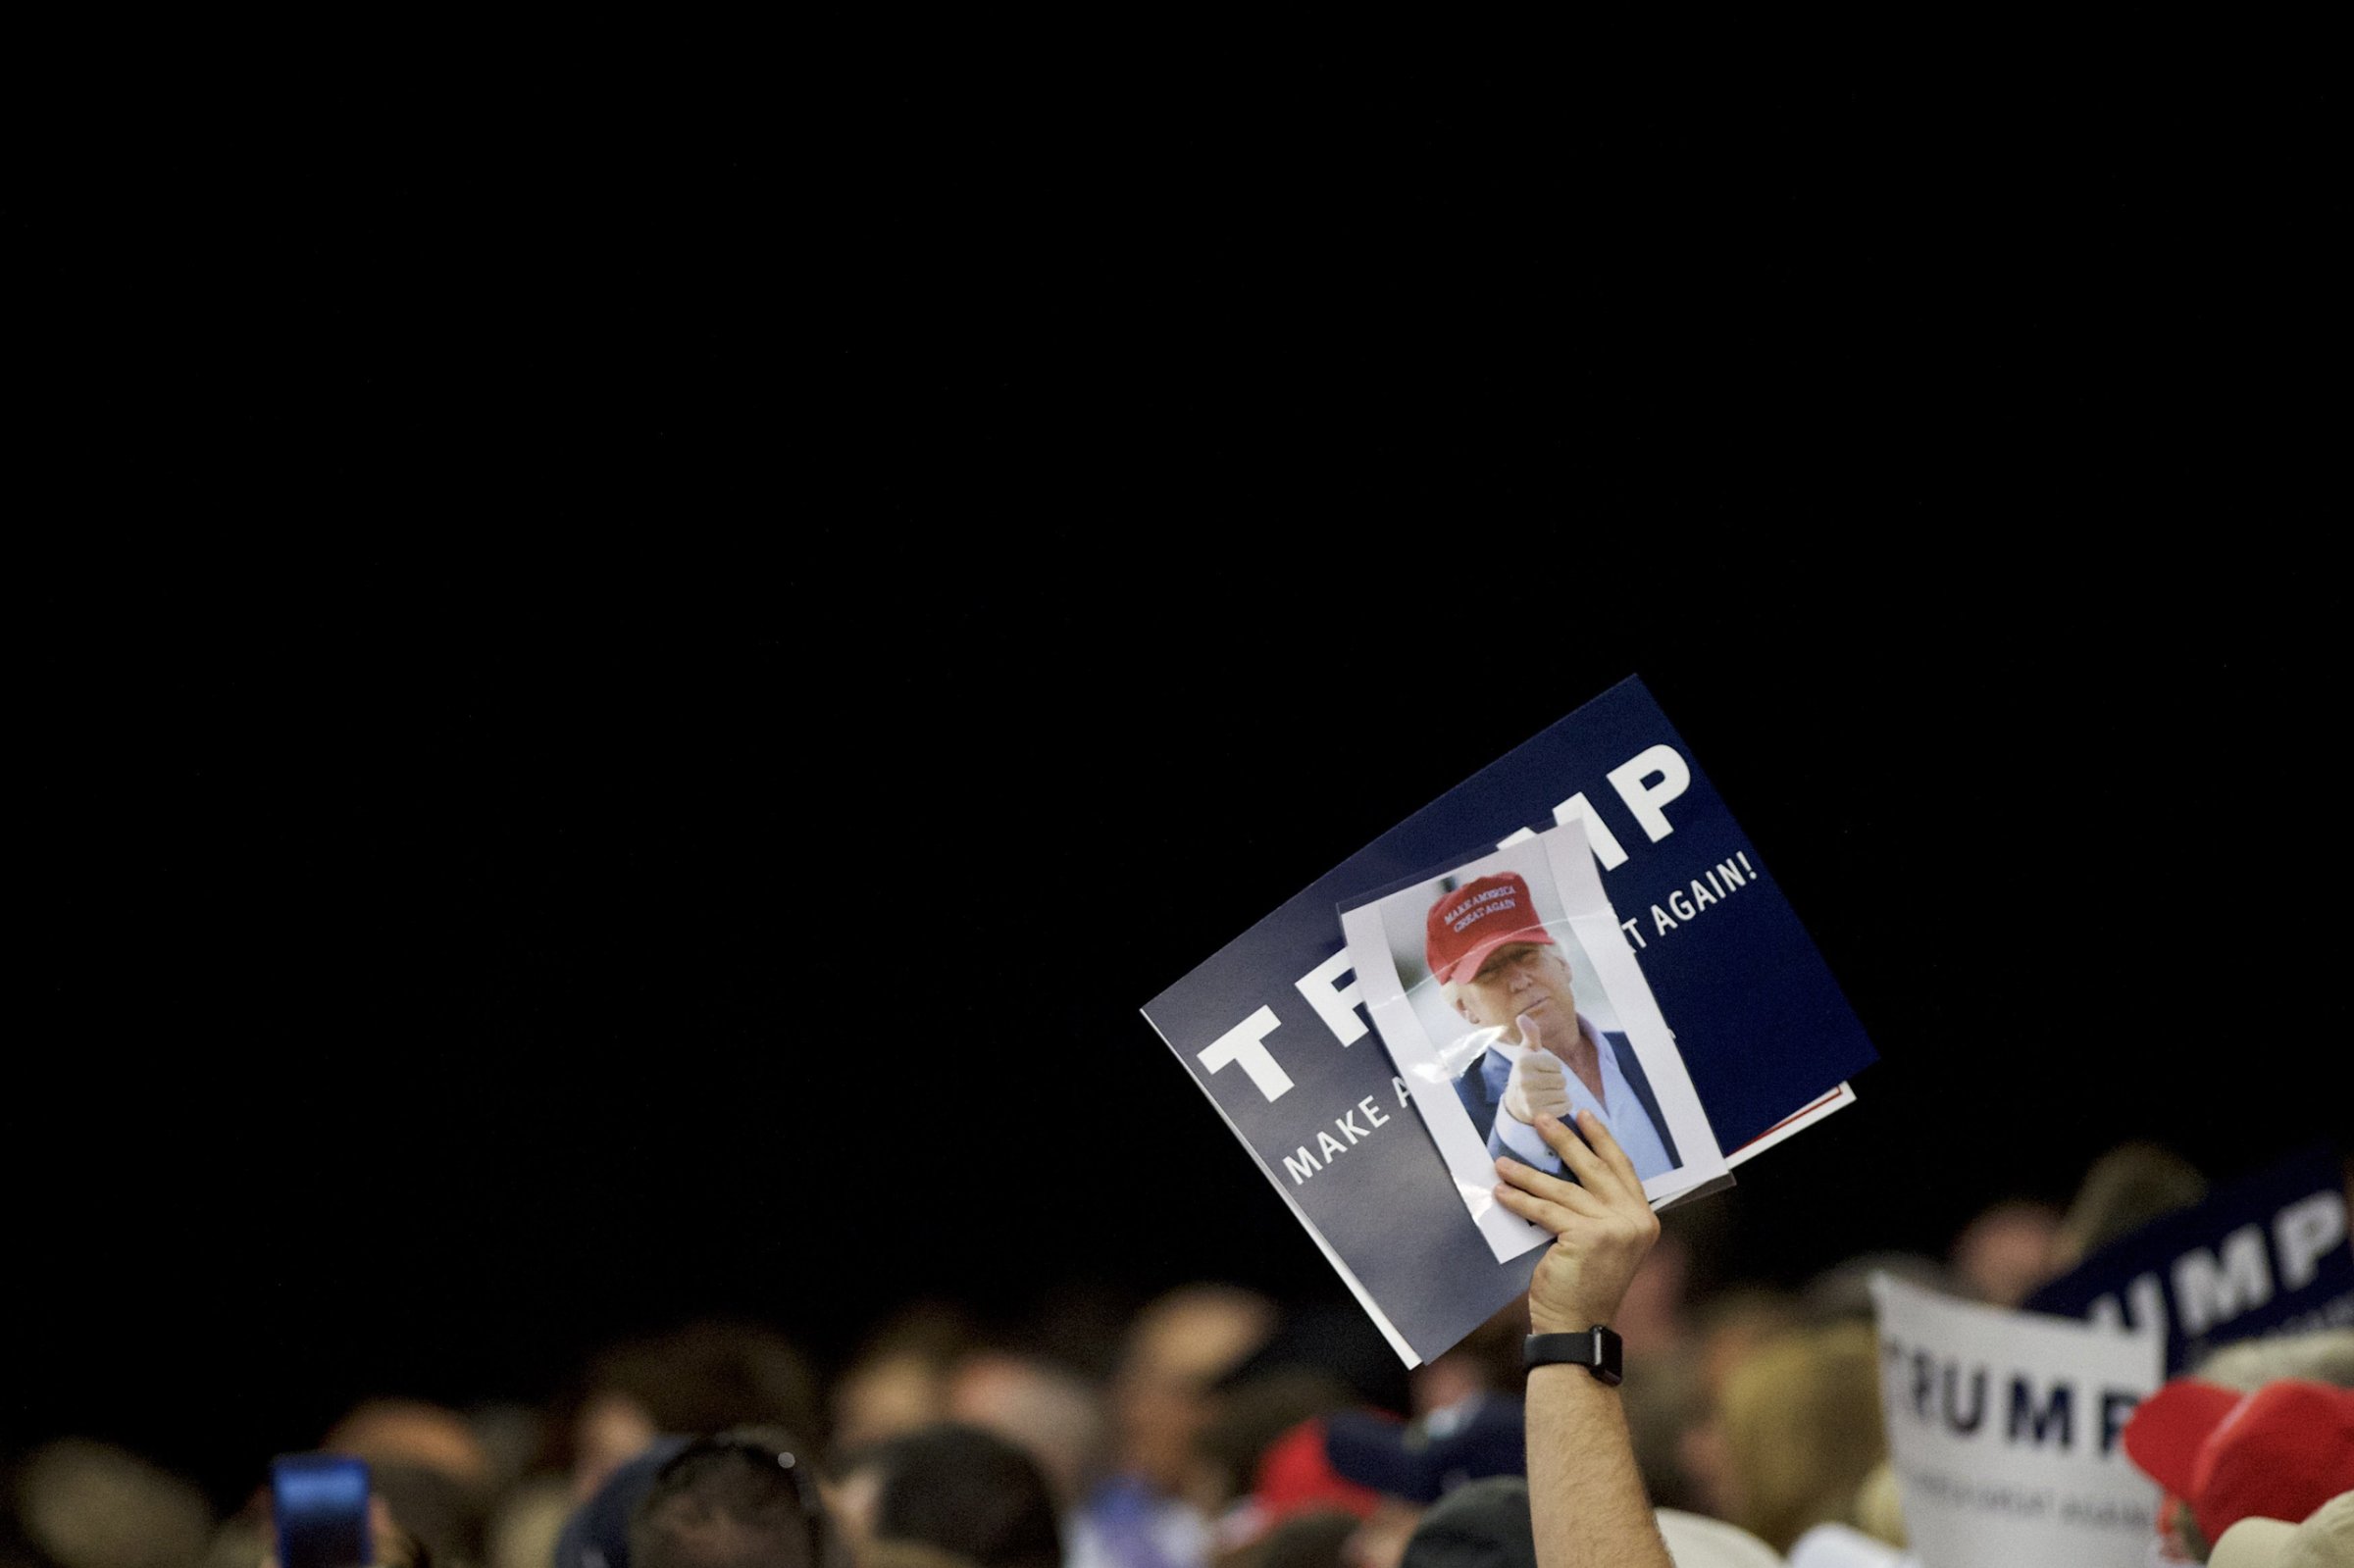 HARRISBURG, PA - APRIL 21: A Donald Trump supporter holds a campaign sign and photograph of the candidate during a rally at the Pennsylvania Farm Show Complex &amp; Expo Center on April 21, 2016 in Harrisburg, Pennsylvania. The Pennsylvania Primary takes place on April 26. (Photo by Mark Makela/Getty Images)